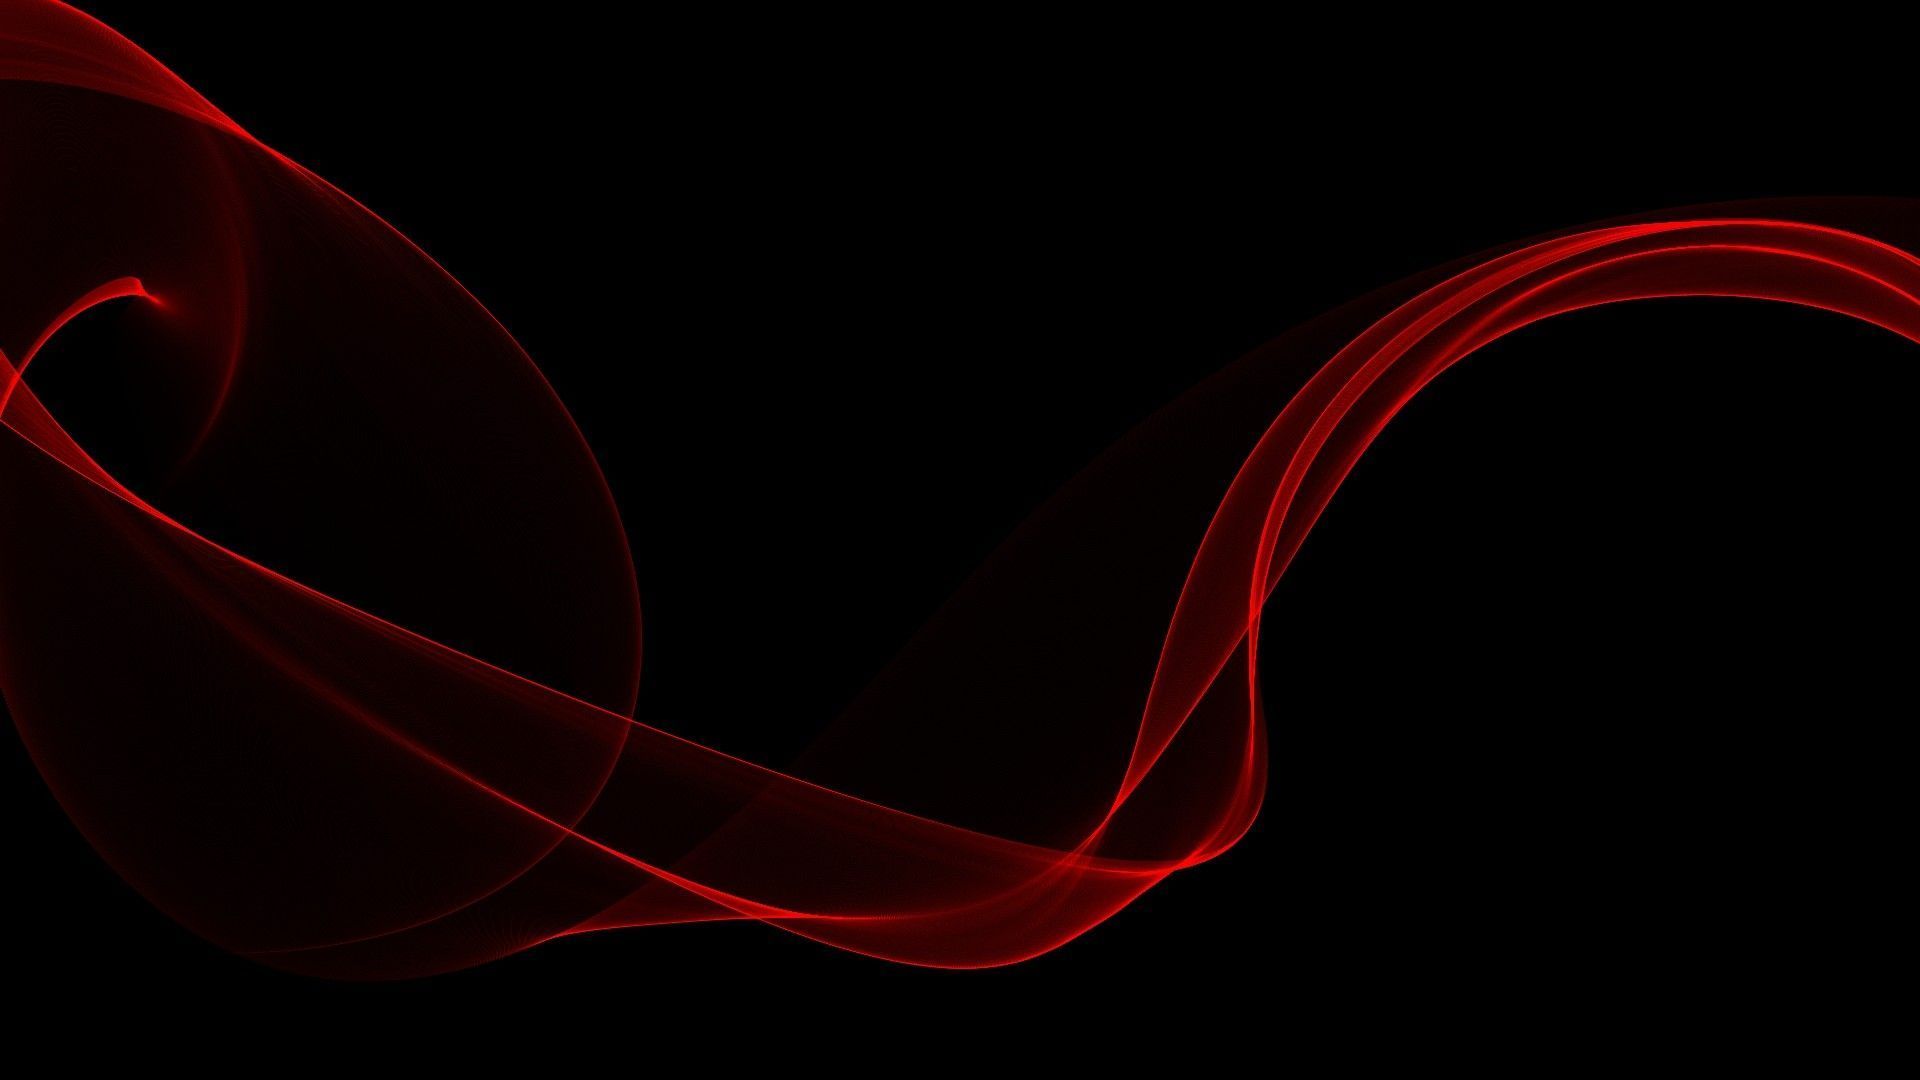 abstract black red wallpaper